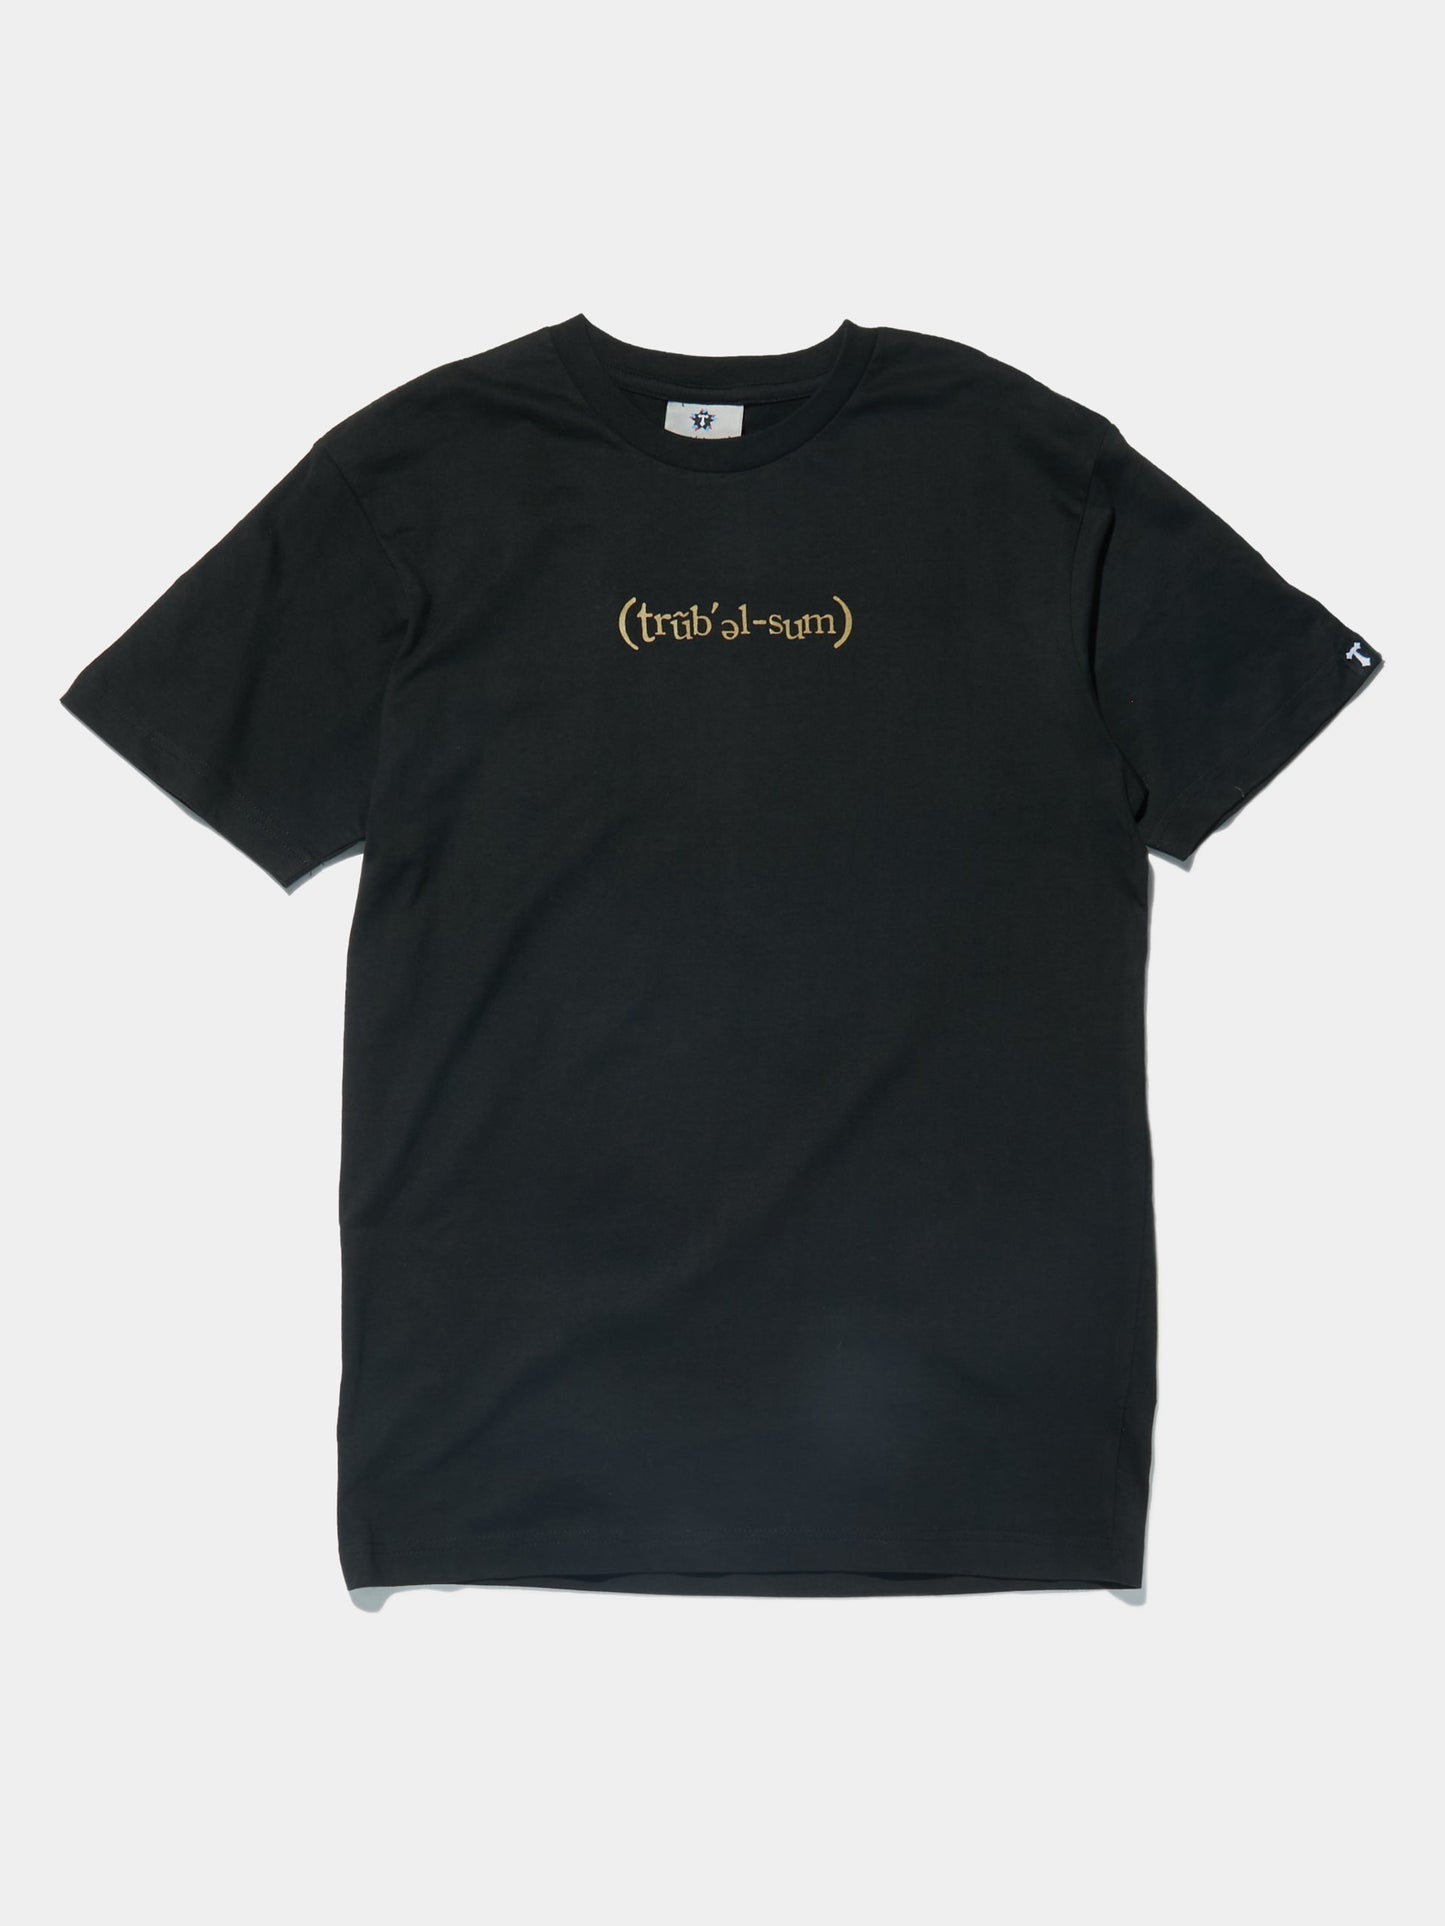 Buy Trubelsum REFLECTIVE TEE (Black/Gold) Online at UNION LOS ANGELES